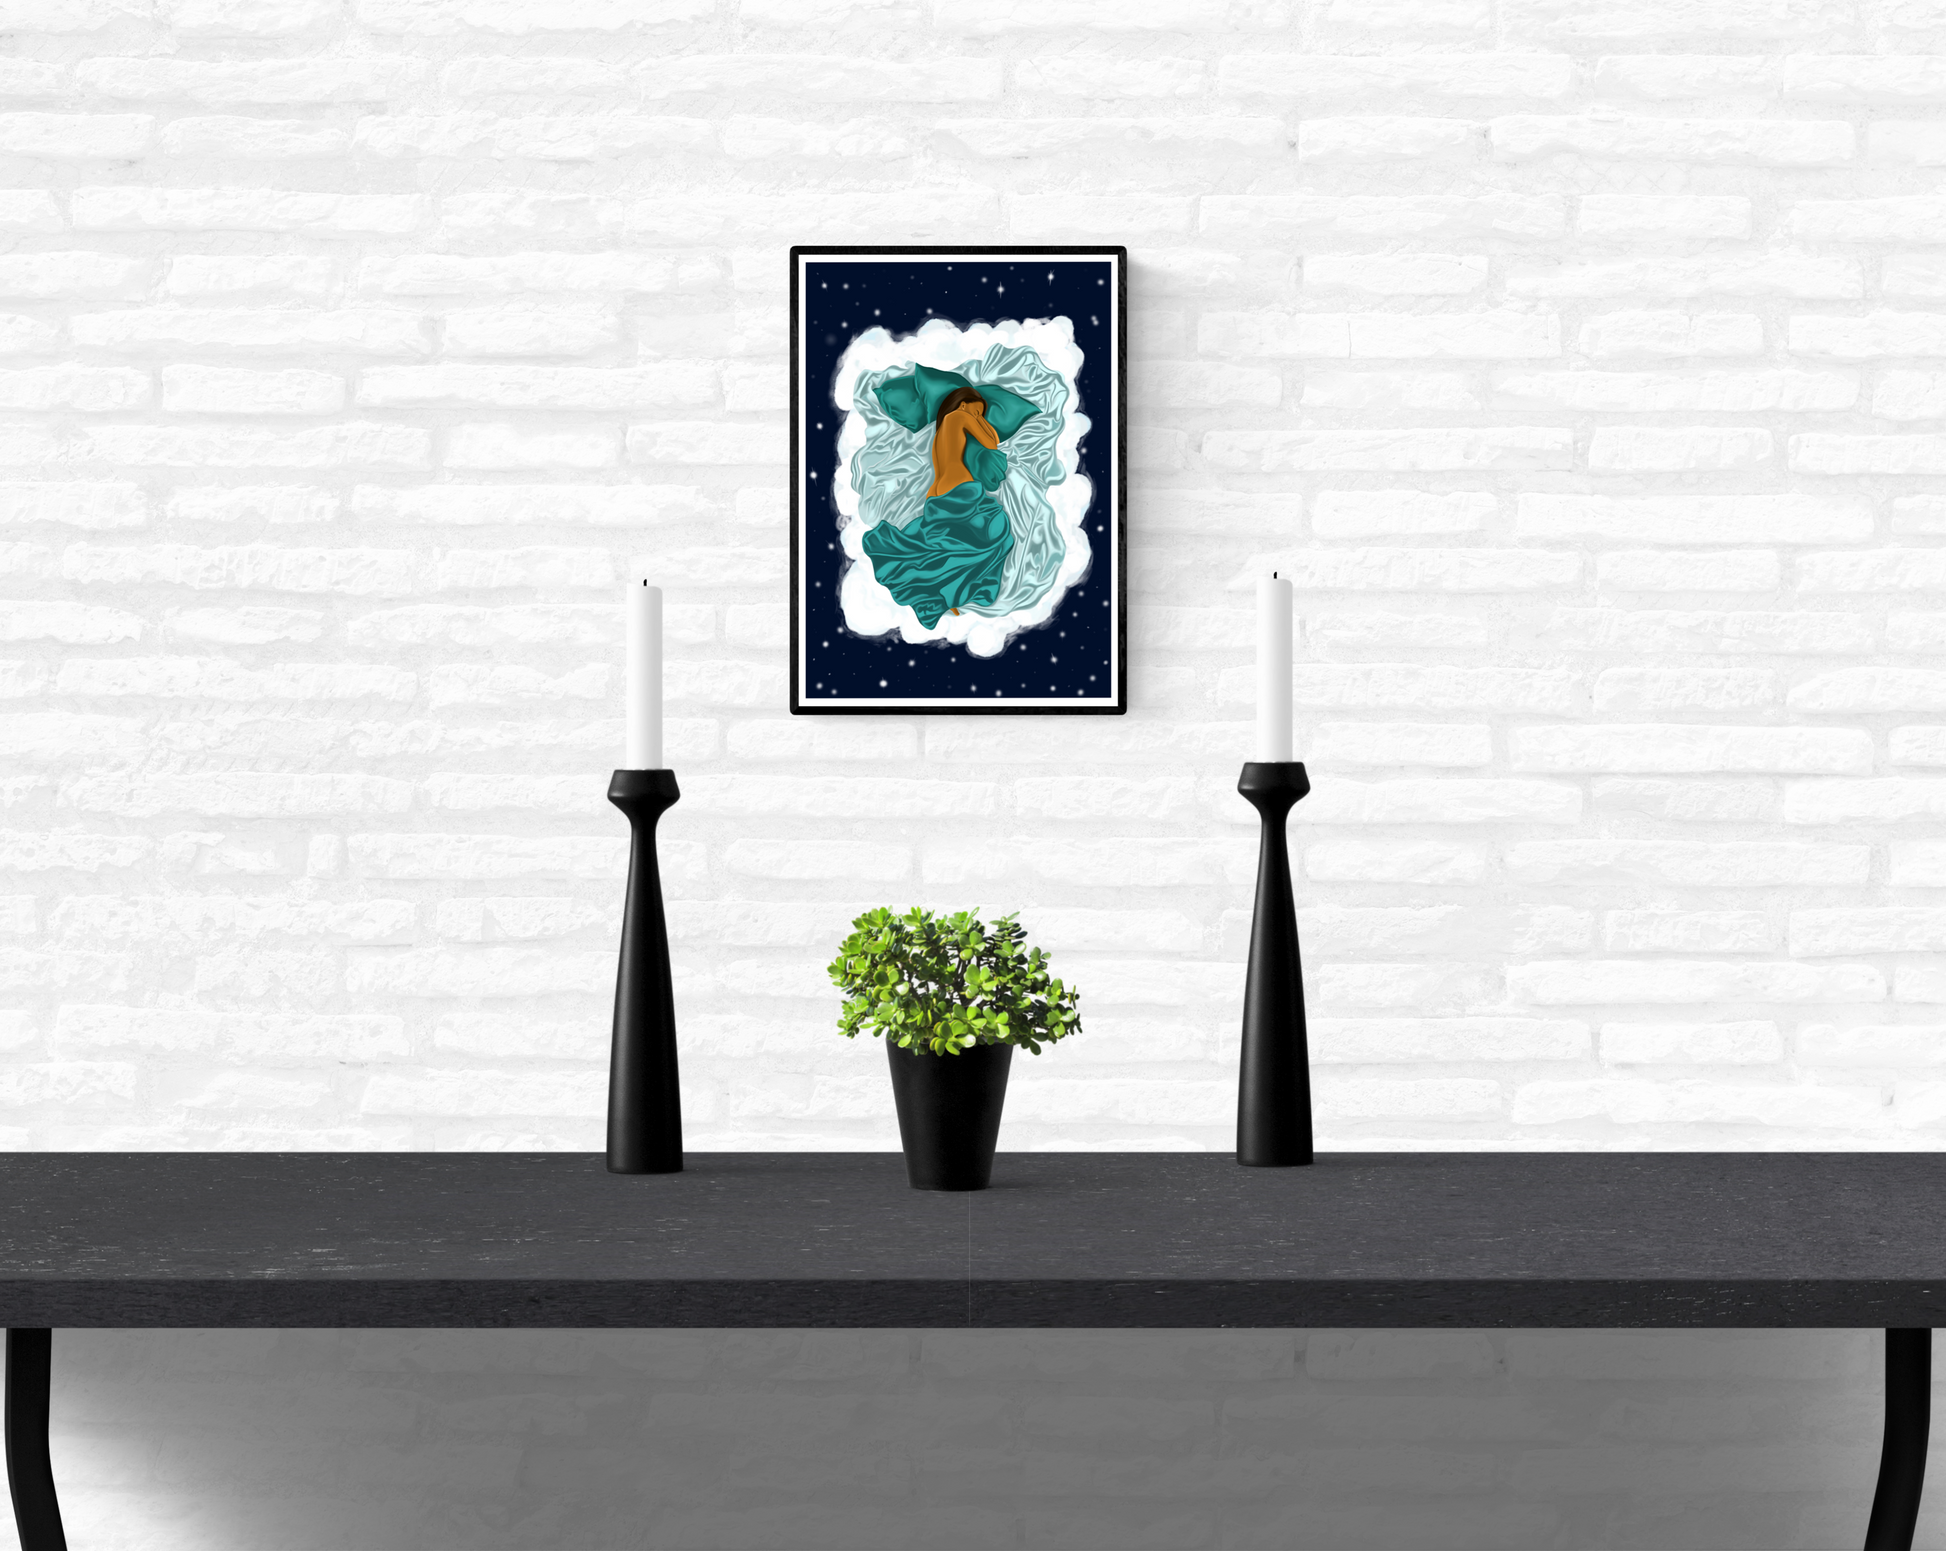 Framed artwork hanging on a white brick wall in a home